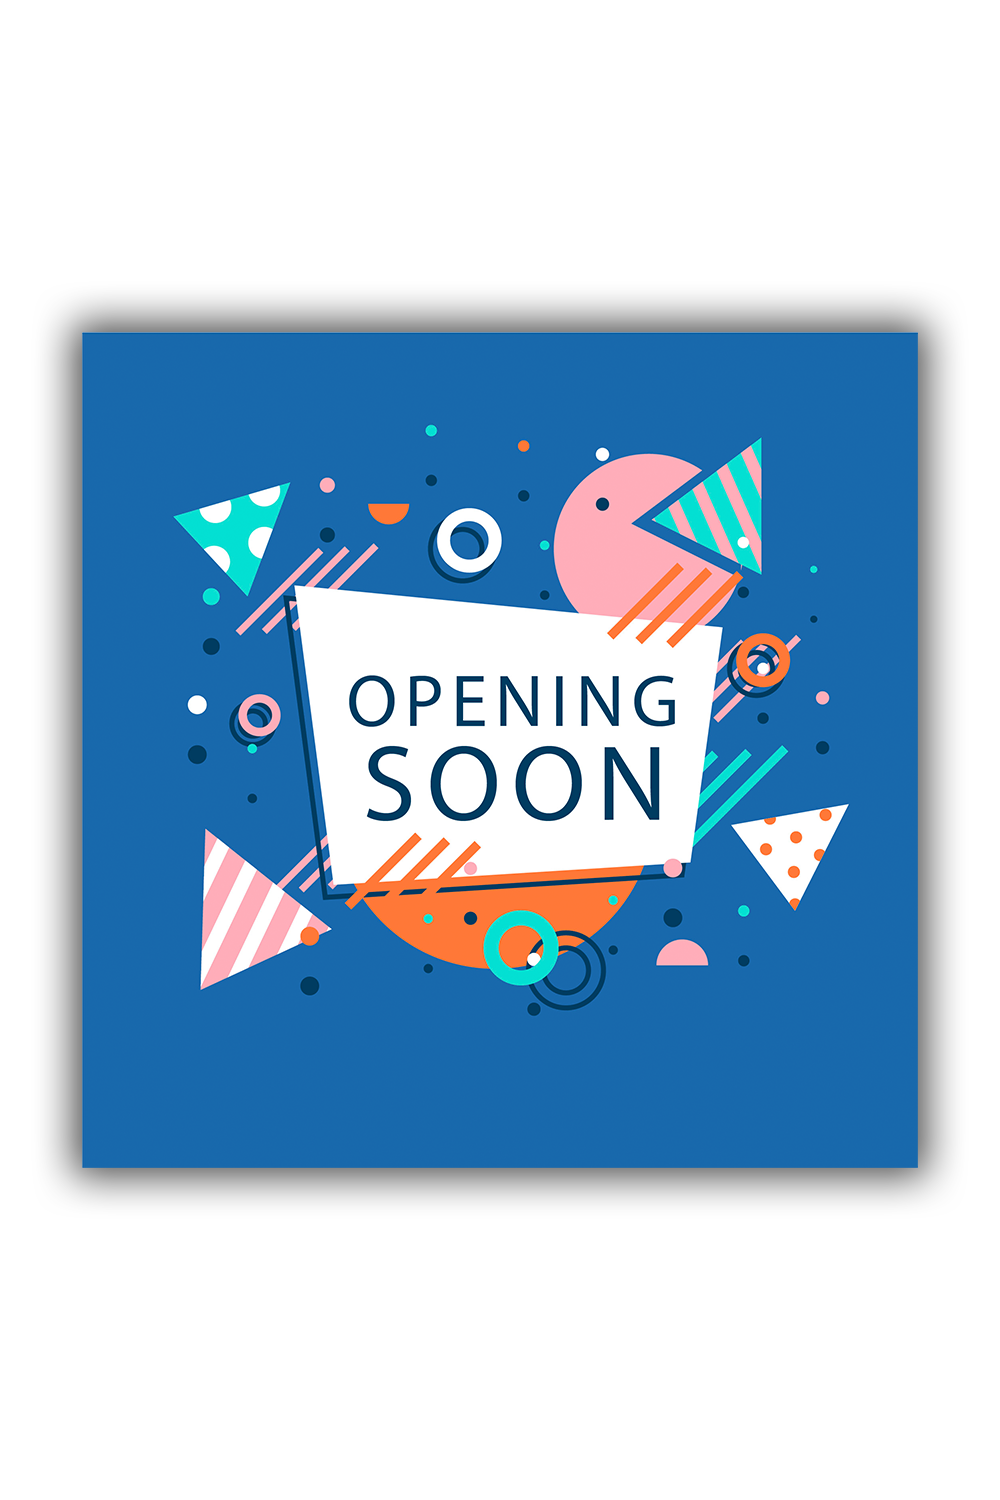 OPENING SOON ILLUSTRATION pinterest preview image.